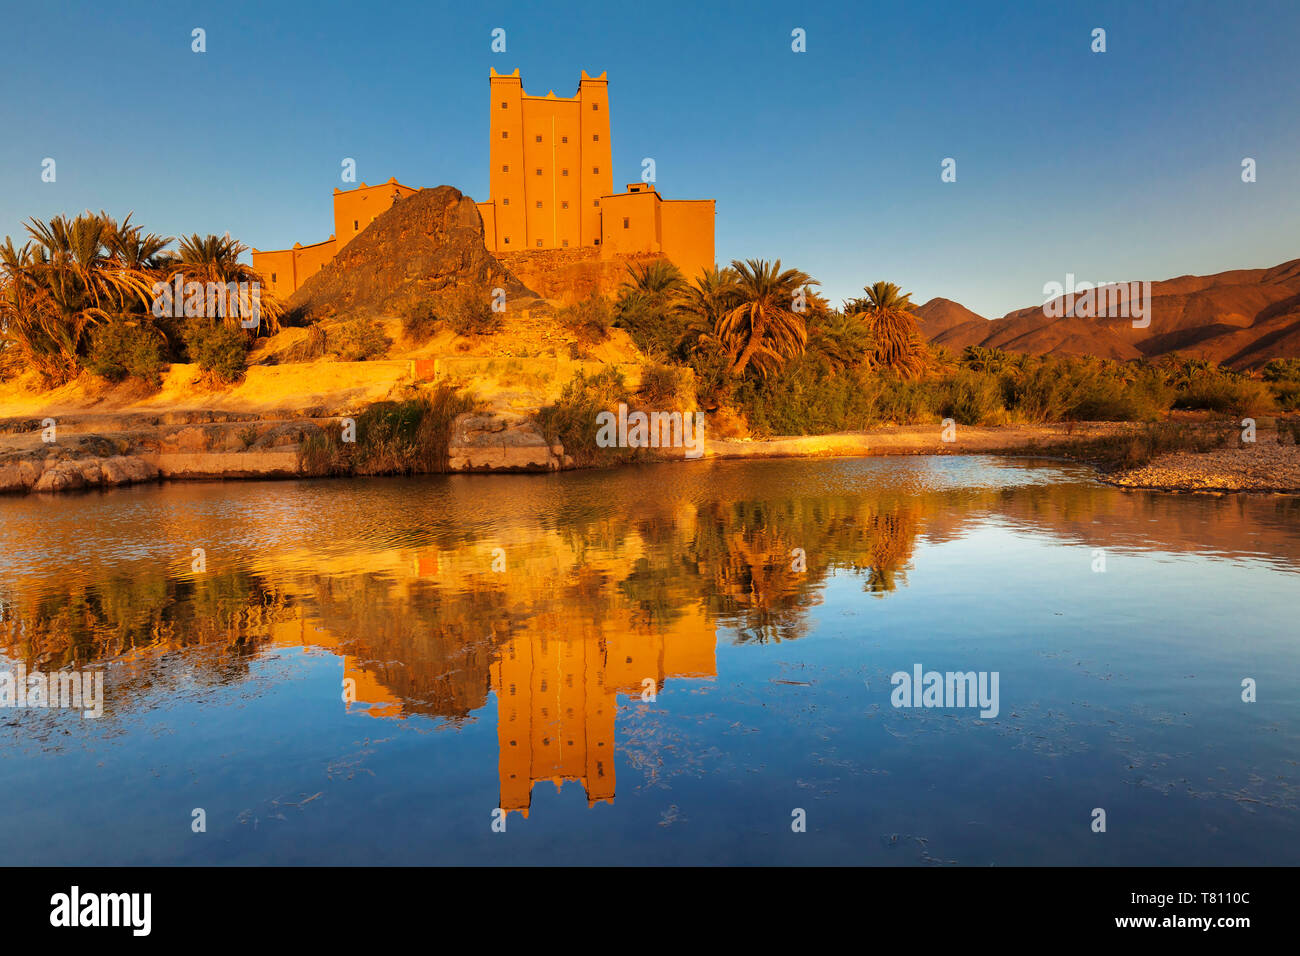 Ait Hamou ou Said Kasbah, Draa River, Draa Valley, Morocco, North Africa, Africa Stock Photo